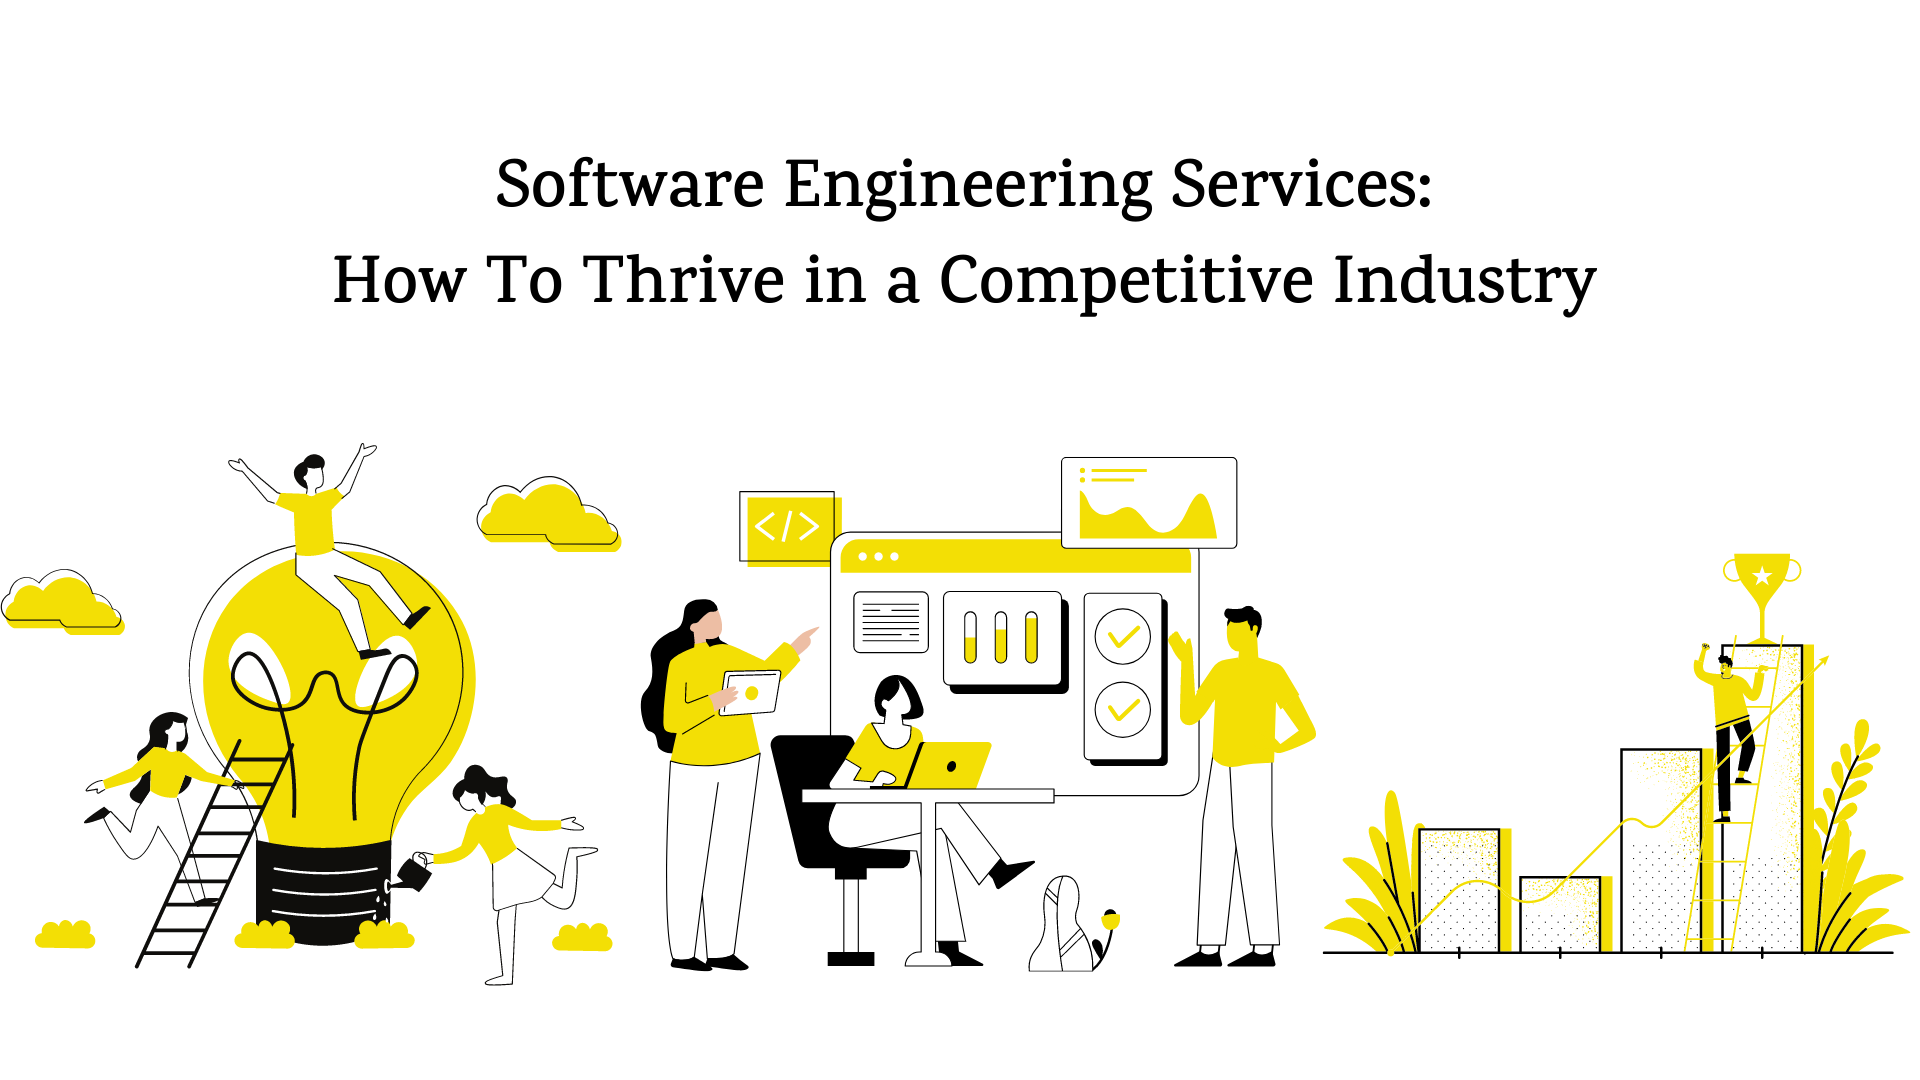 Software Engineering Services: How To Thrive in a Competitive Industry